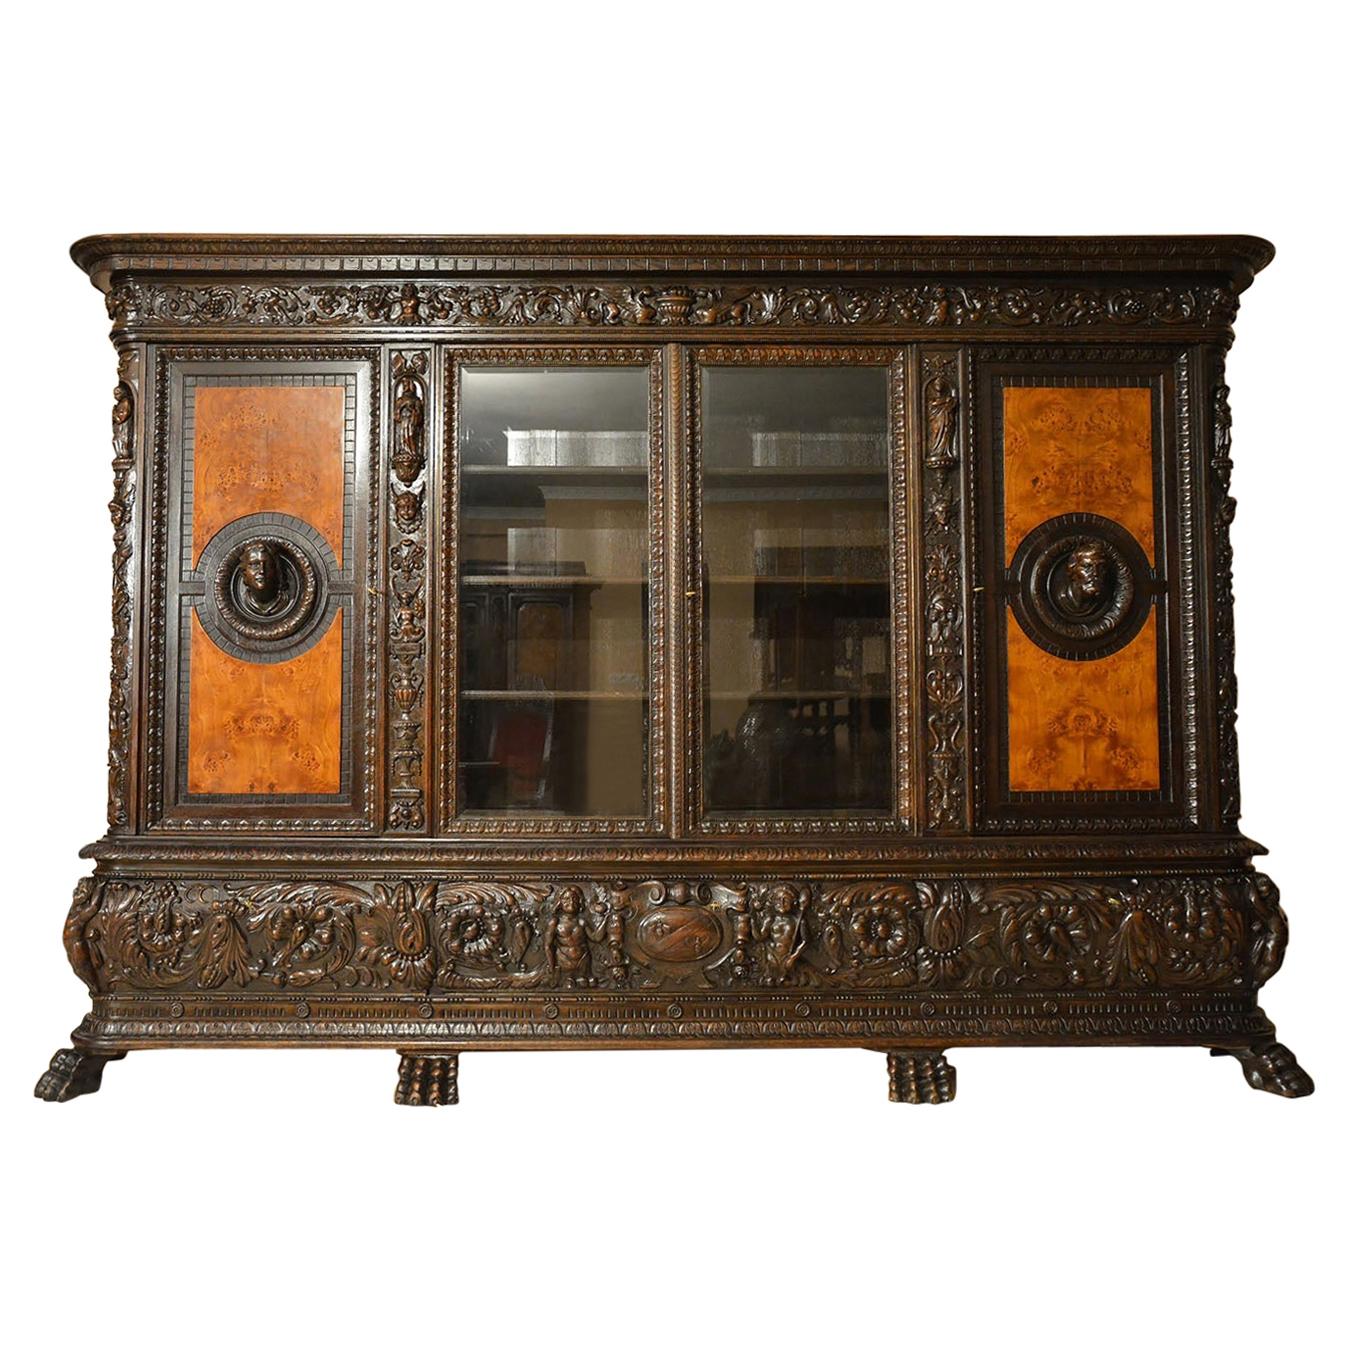 Renaissance Revival Style Oak Bookcase with Drink Bar Beginning of 20th Century For Sale